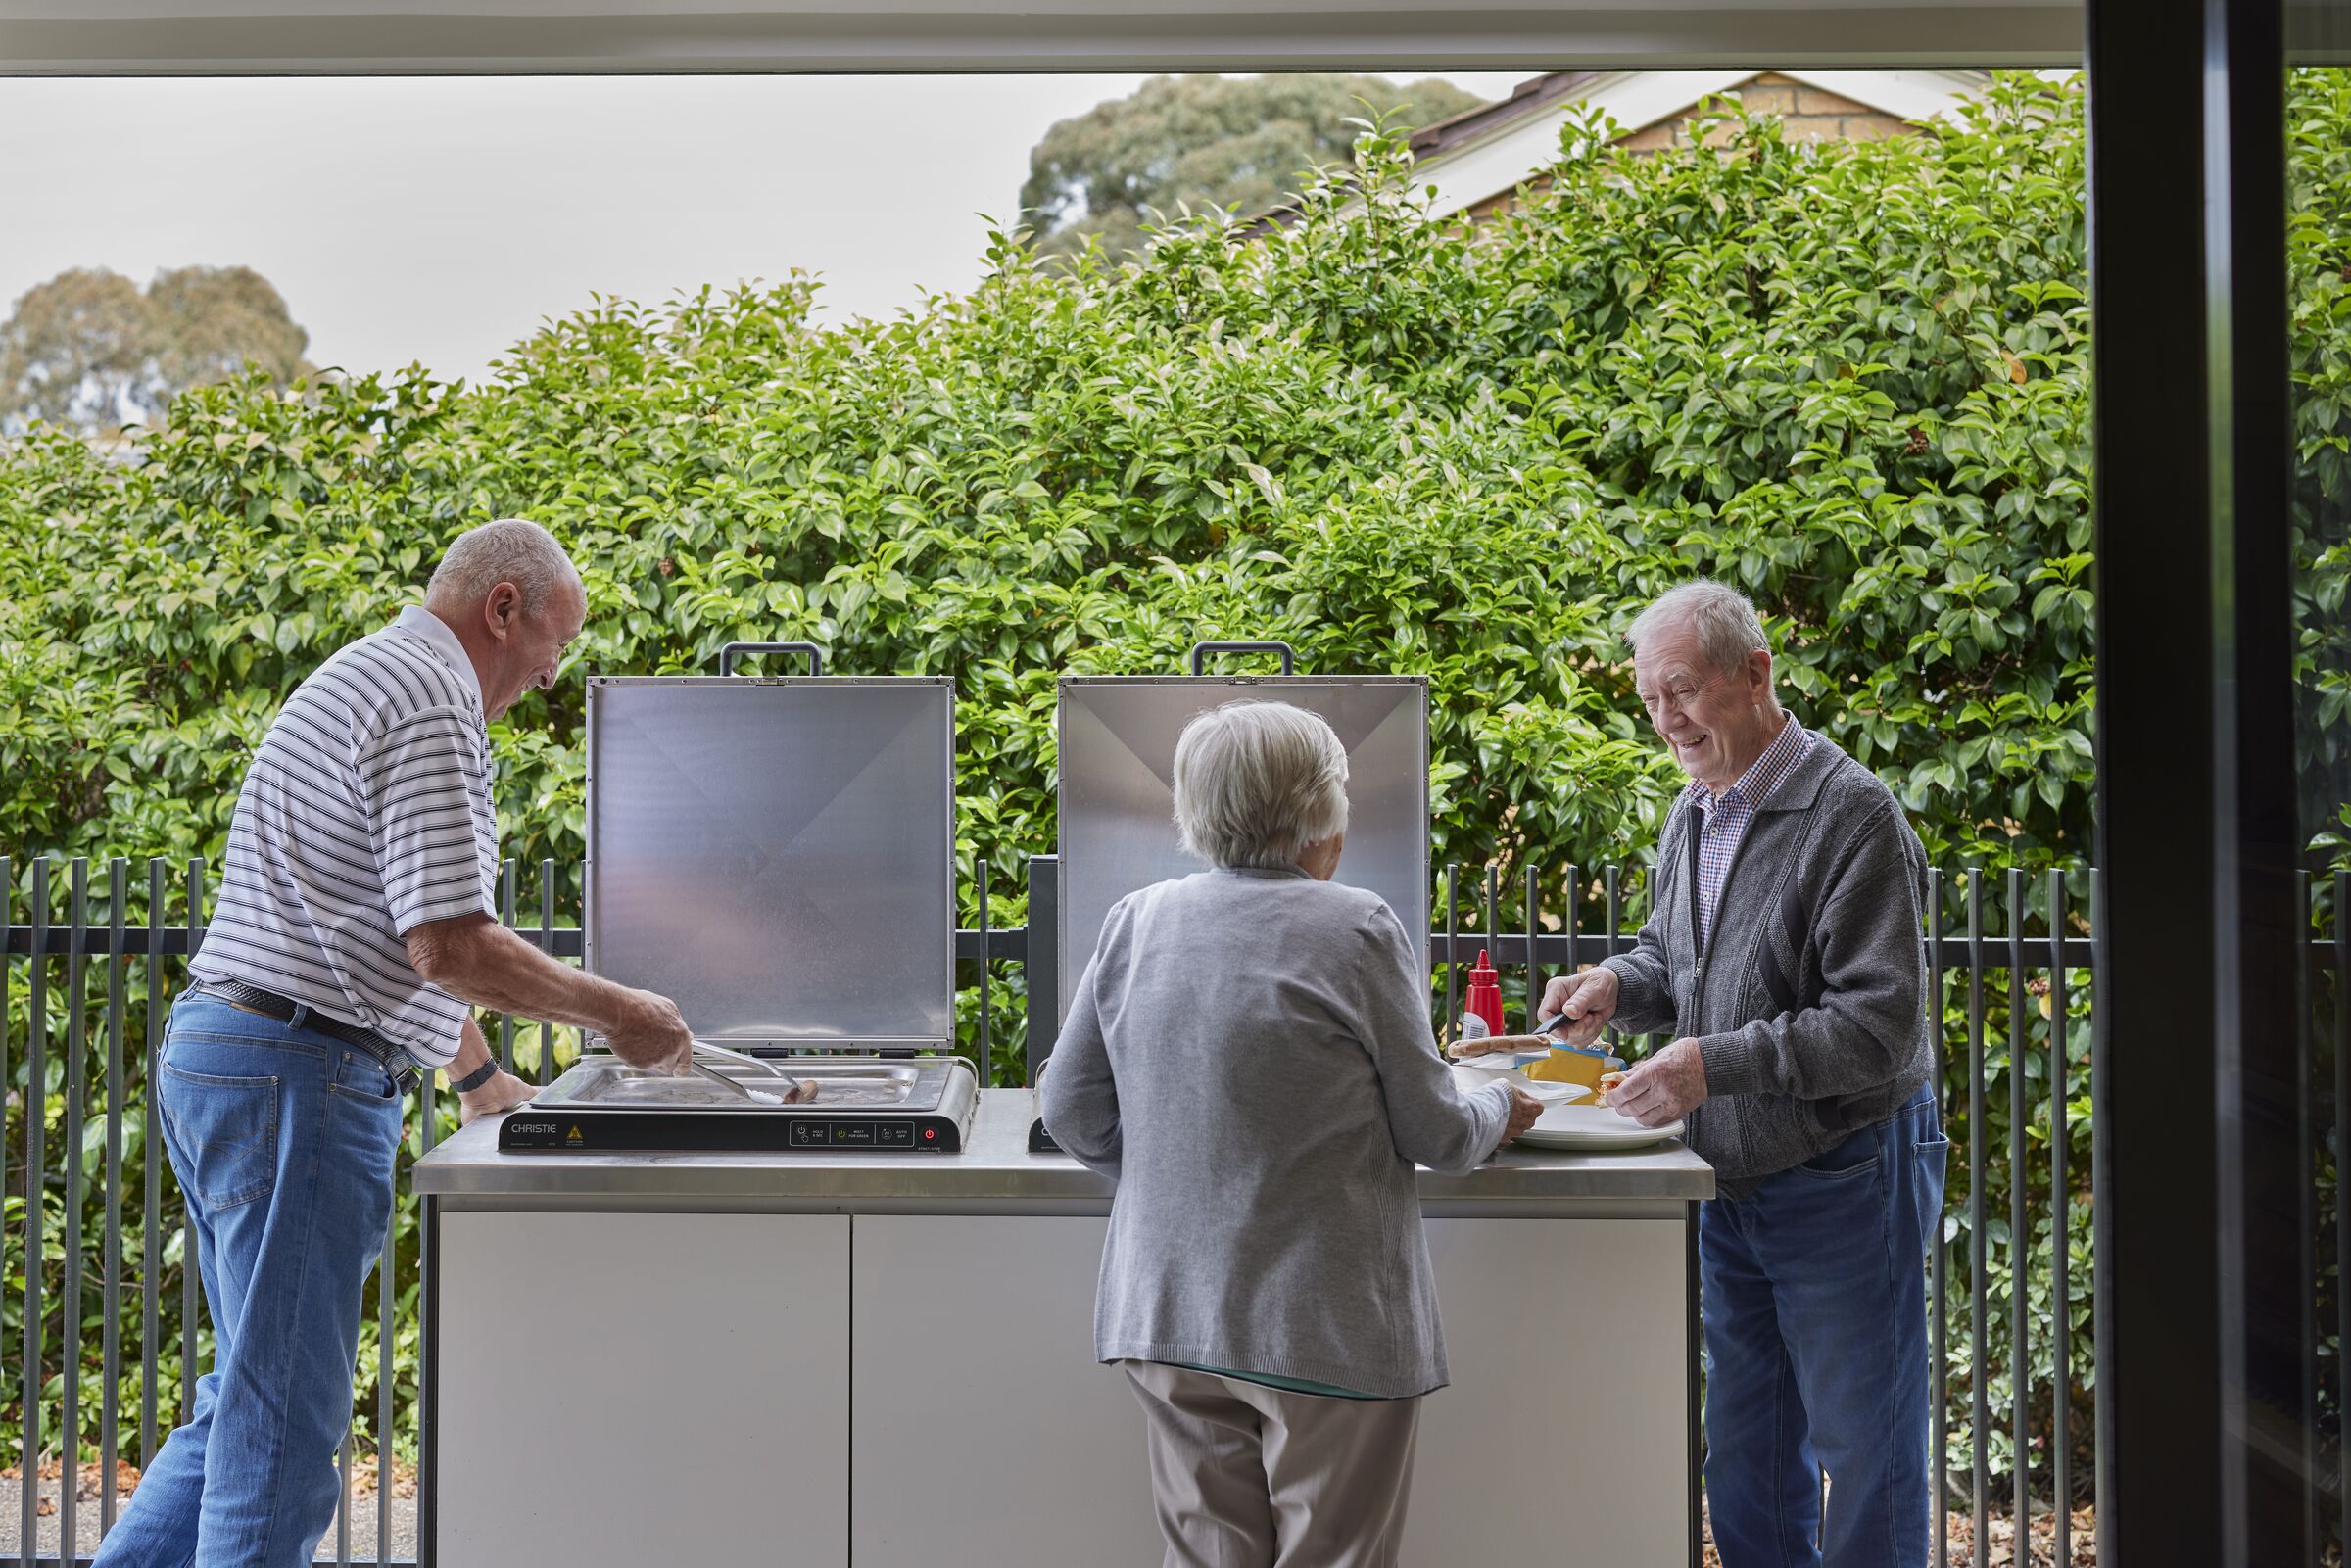 Viewbank Gardens residents chatting over a BBQ